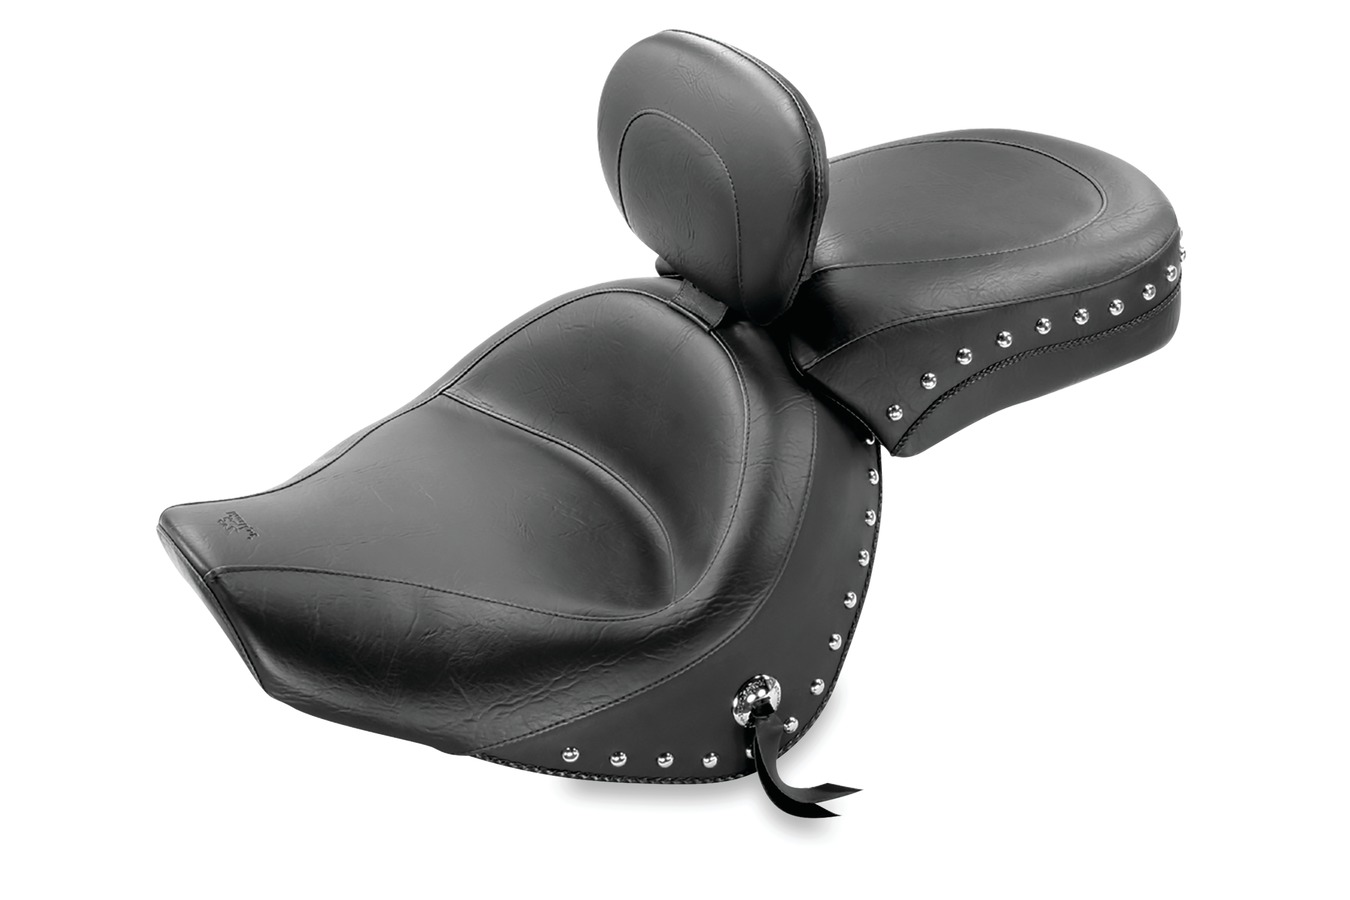 Standard Touring Two-Piece Seat with Driver Backrest for Suzuki Boulevard C90 & C90T 2005-